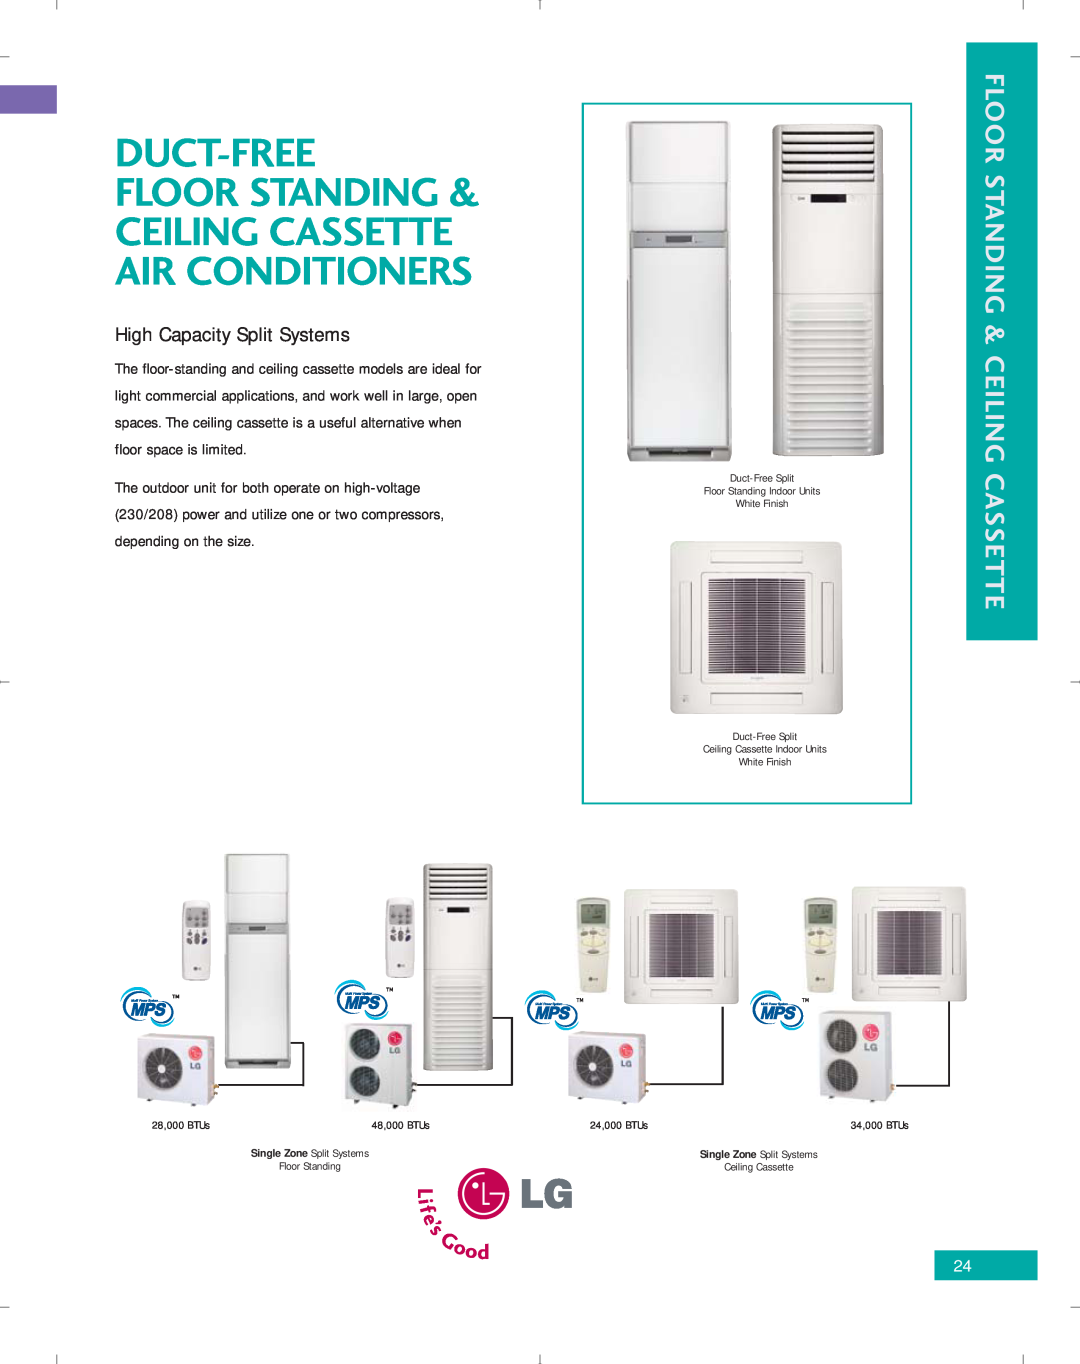 LG Electronics PG-100-2006-VER3 Floor Standing & Ceiling Cassette, High Capacity Split Systems, Duct-Free, 28,000 BTUs 